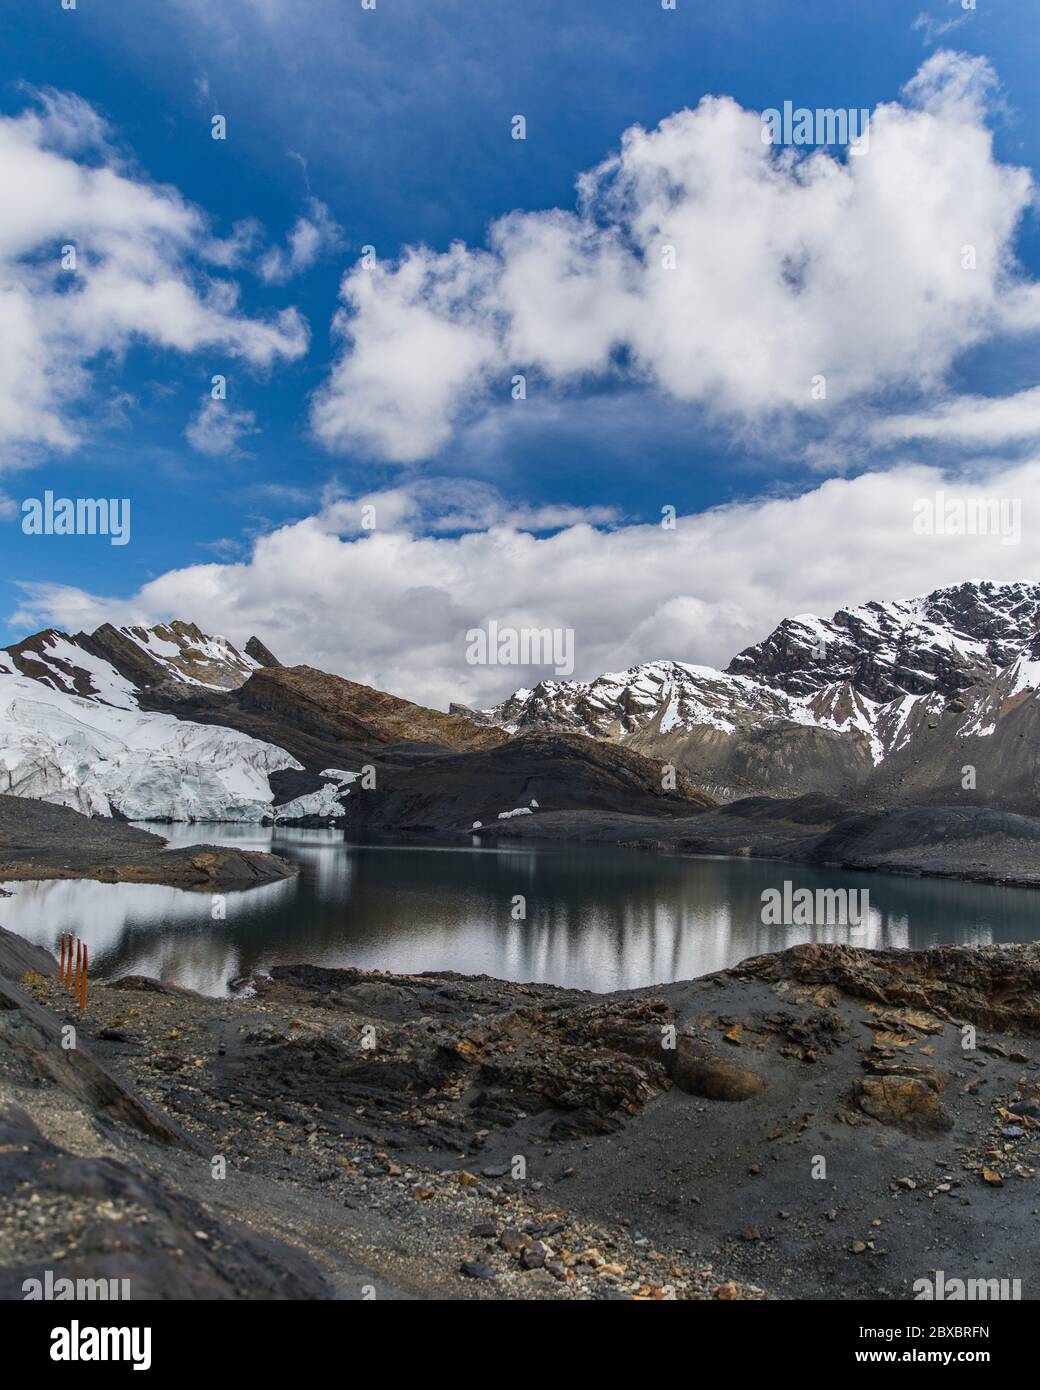 landscape with a glacier and snowy, beautiful lake, clouds and blue sky, no people Stock Photo